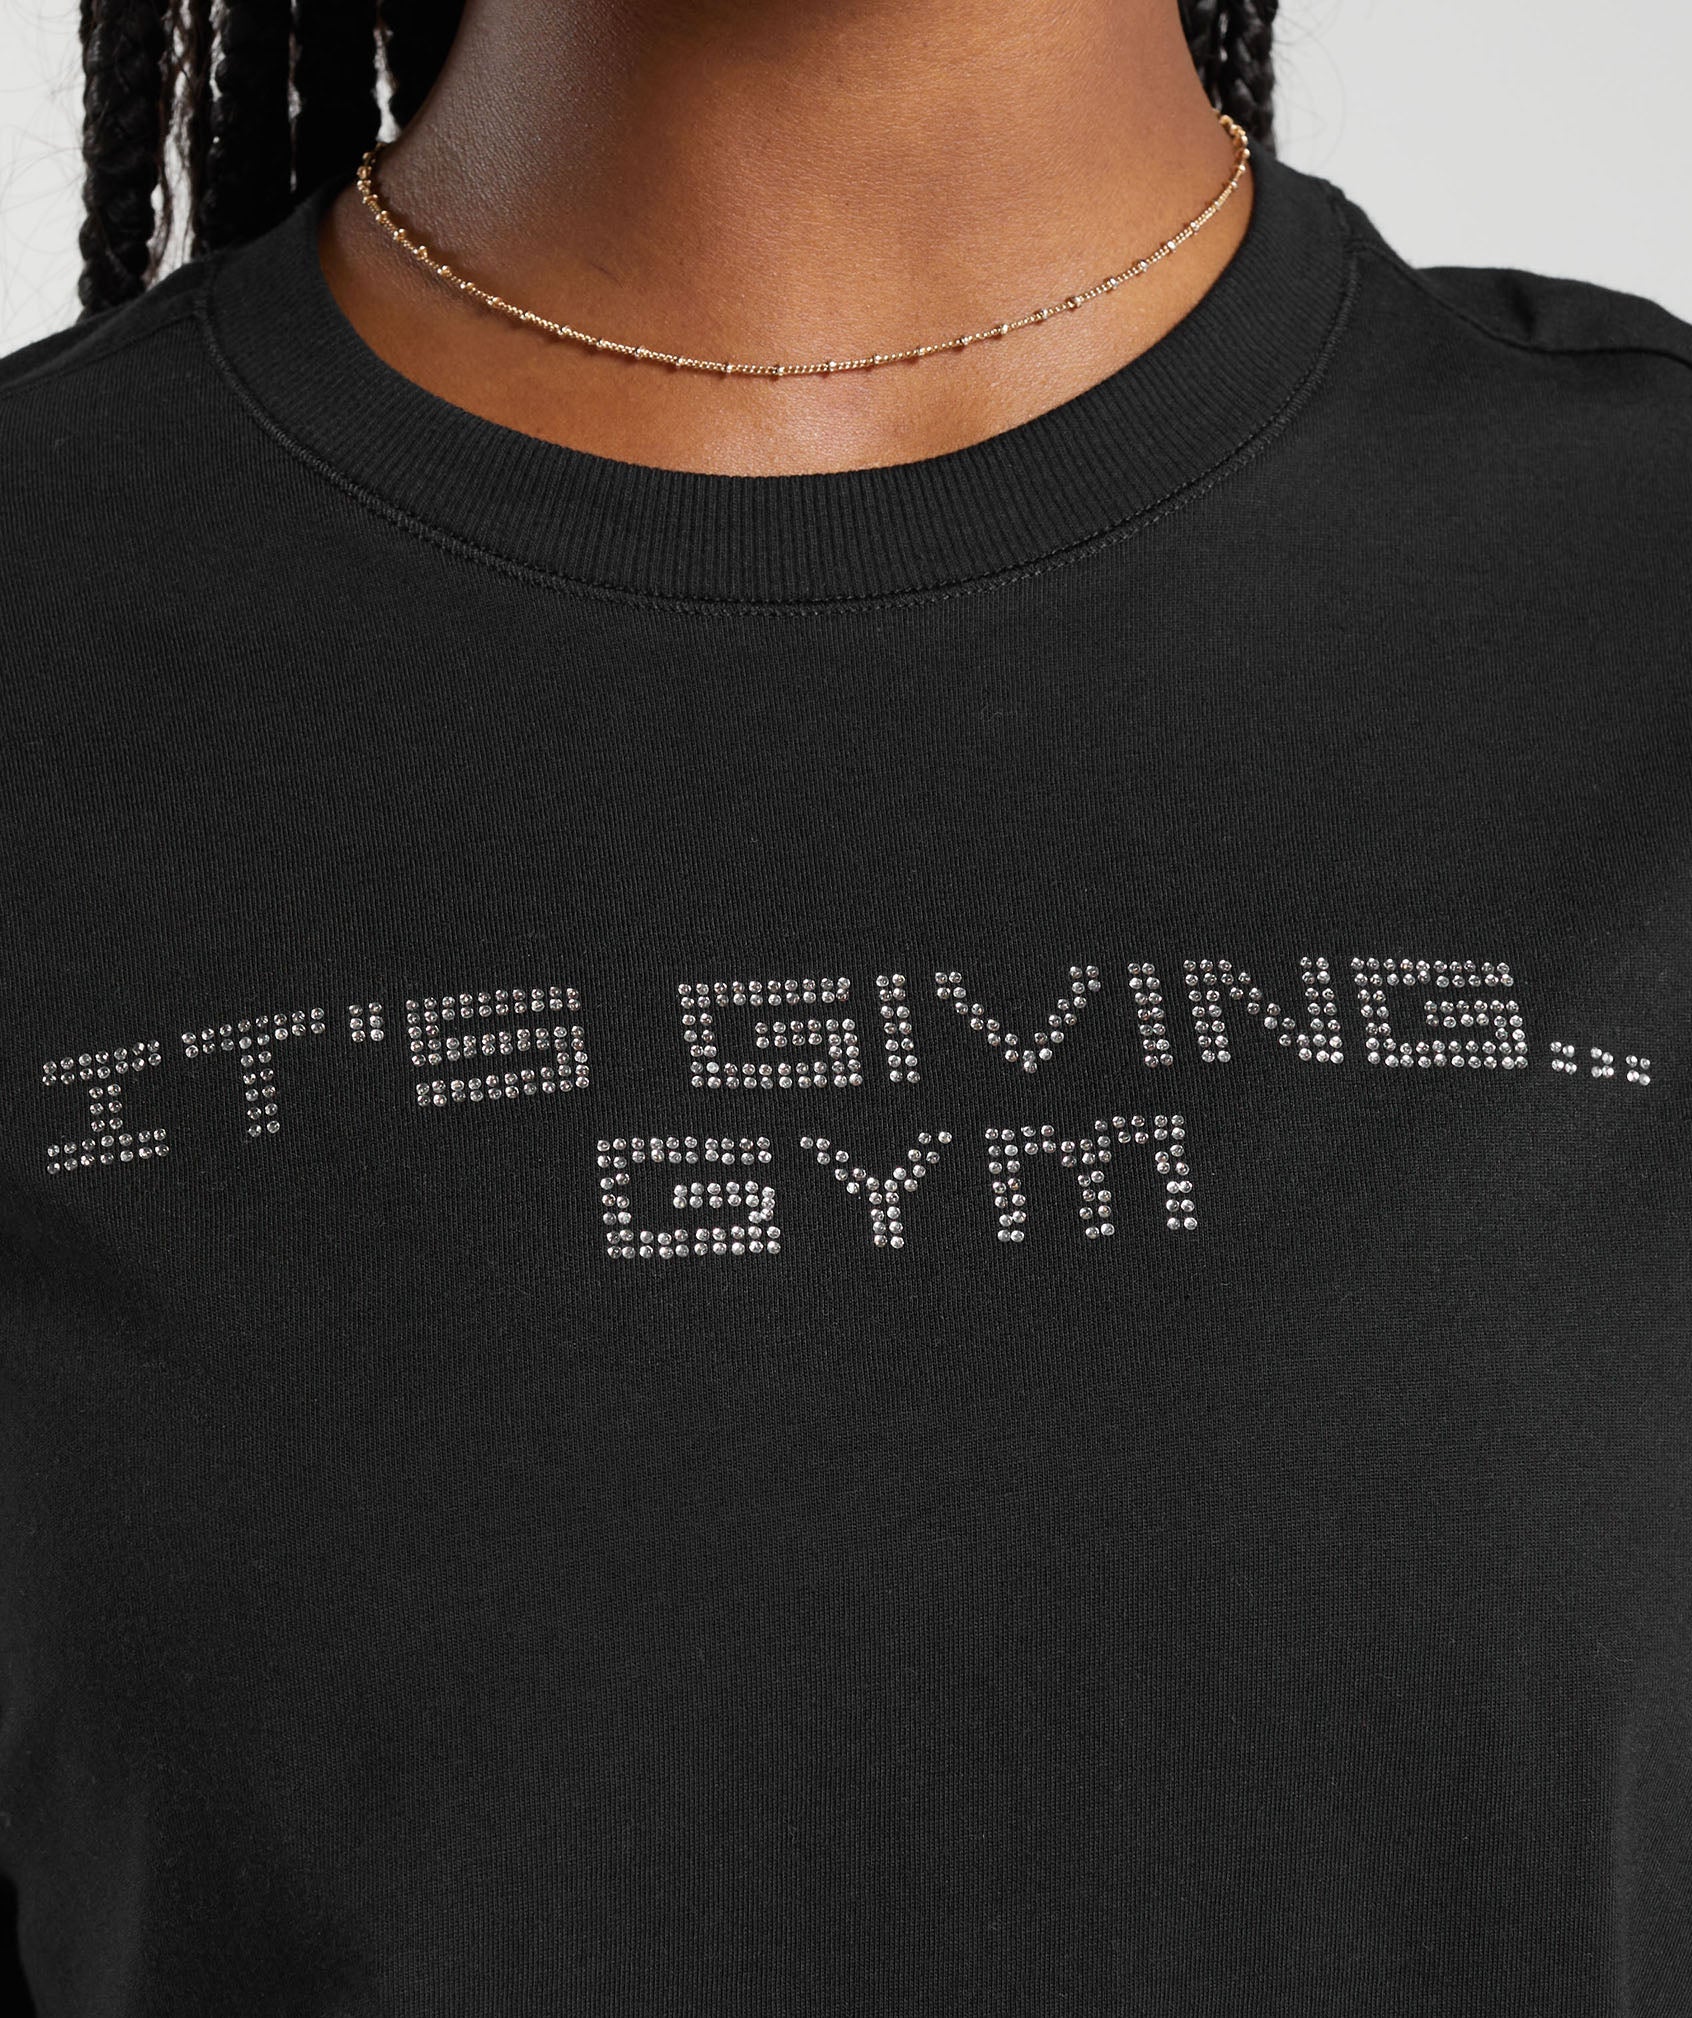 Its Giving Gym Long Sleeve Top in Black - view 5